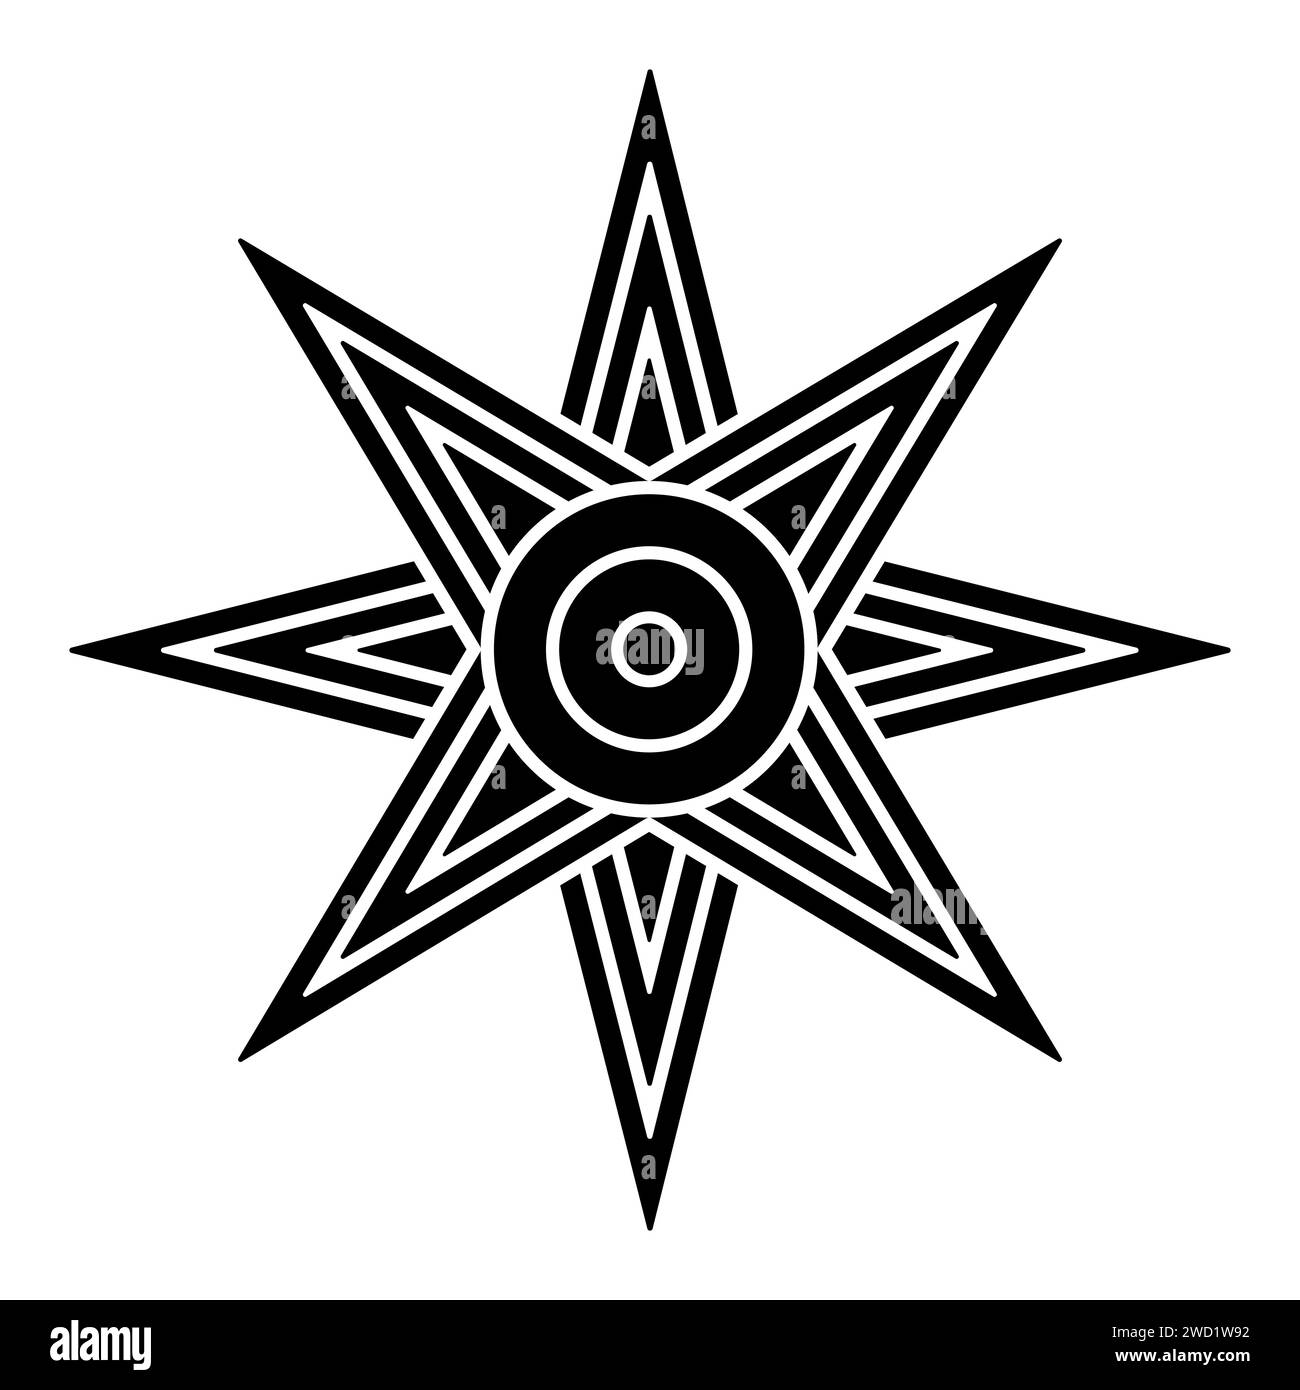 Star of Ishtar or Inanna, or also Star of Venus is usually depicted with eight points. Symbol of ancient Sumerian goddess Inanna, and Ishtar. Stock Photo